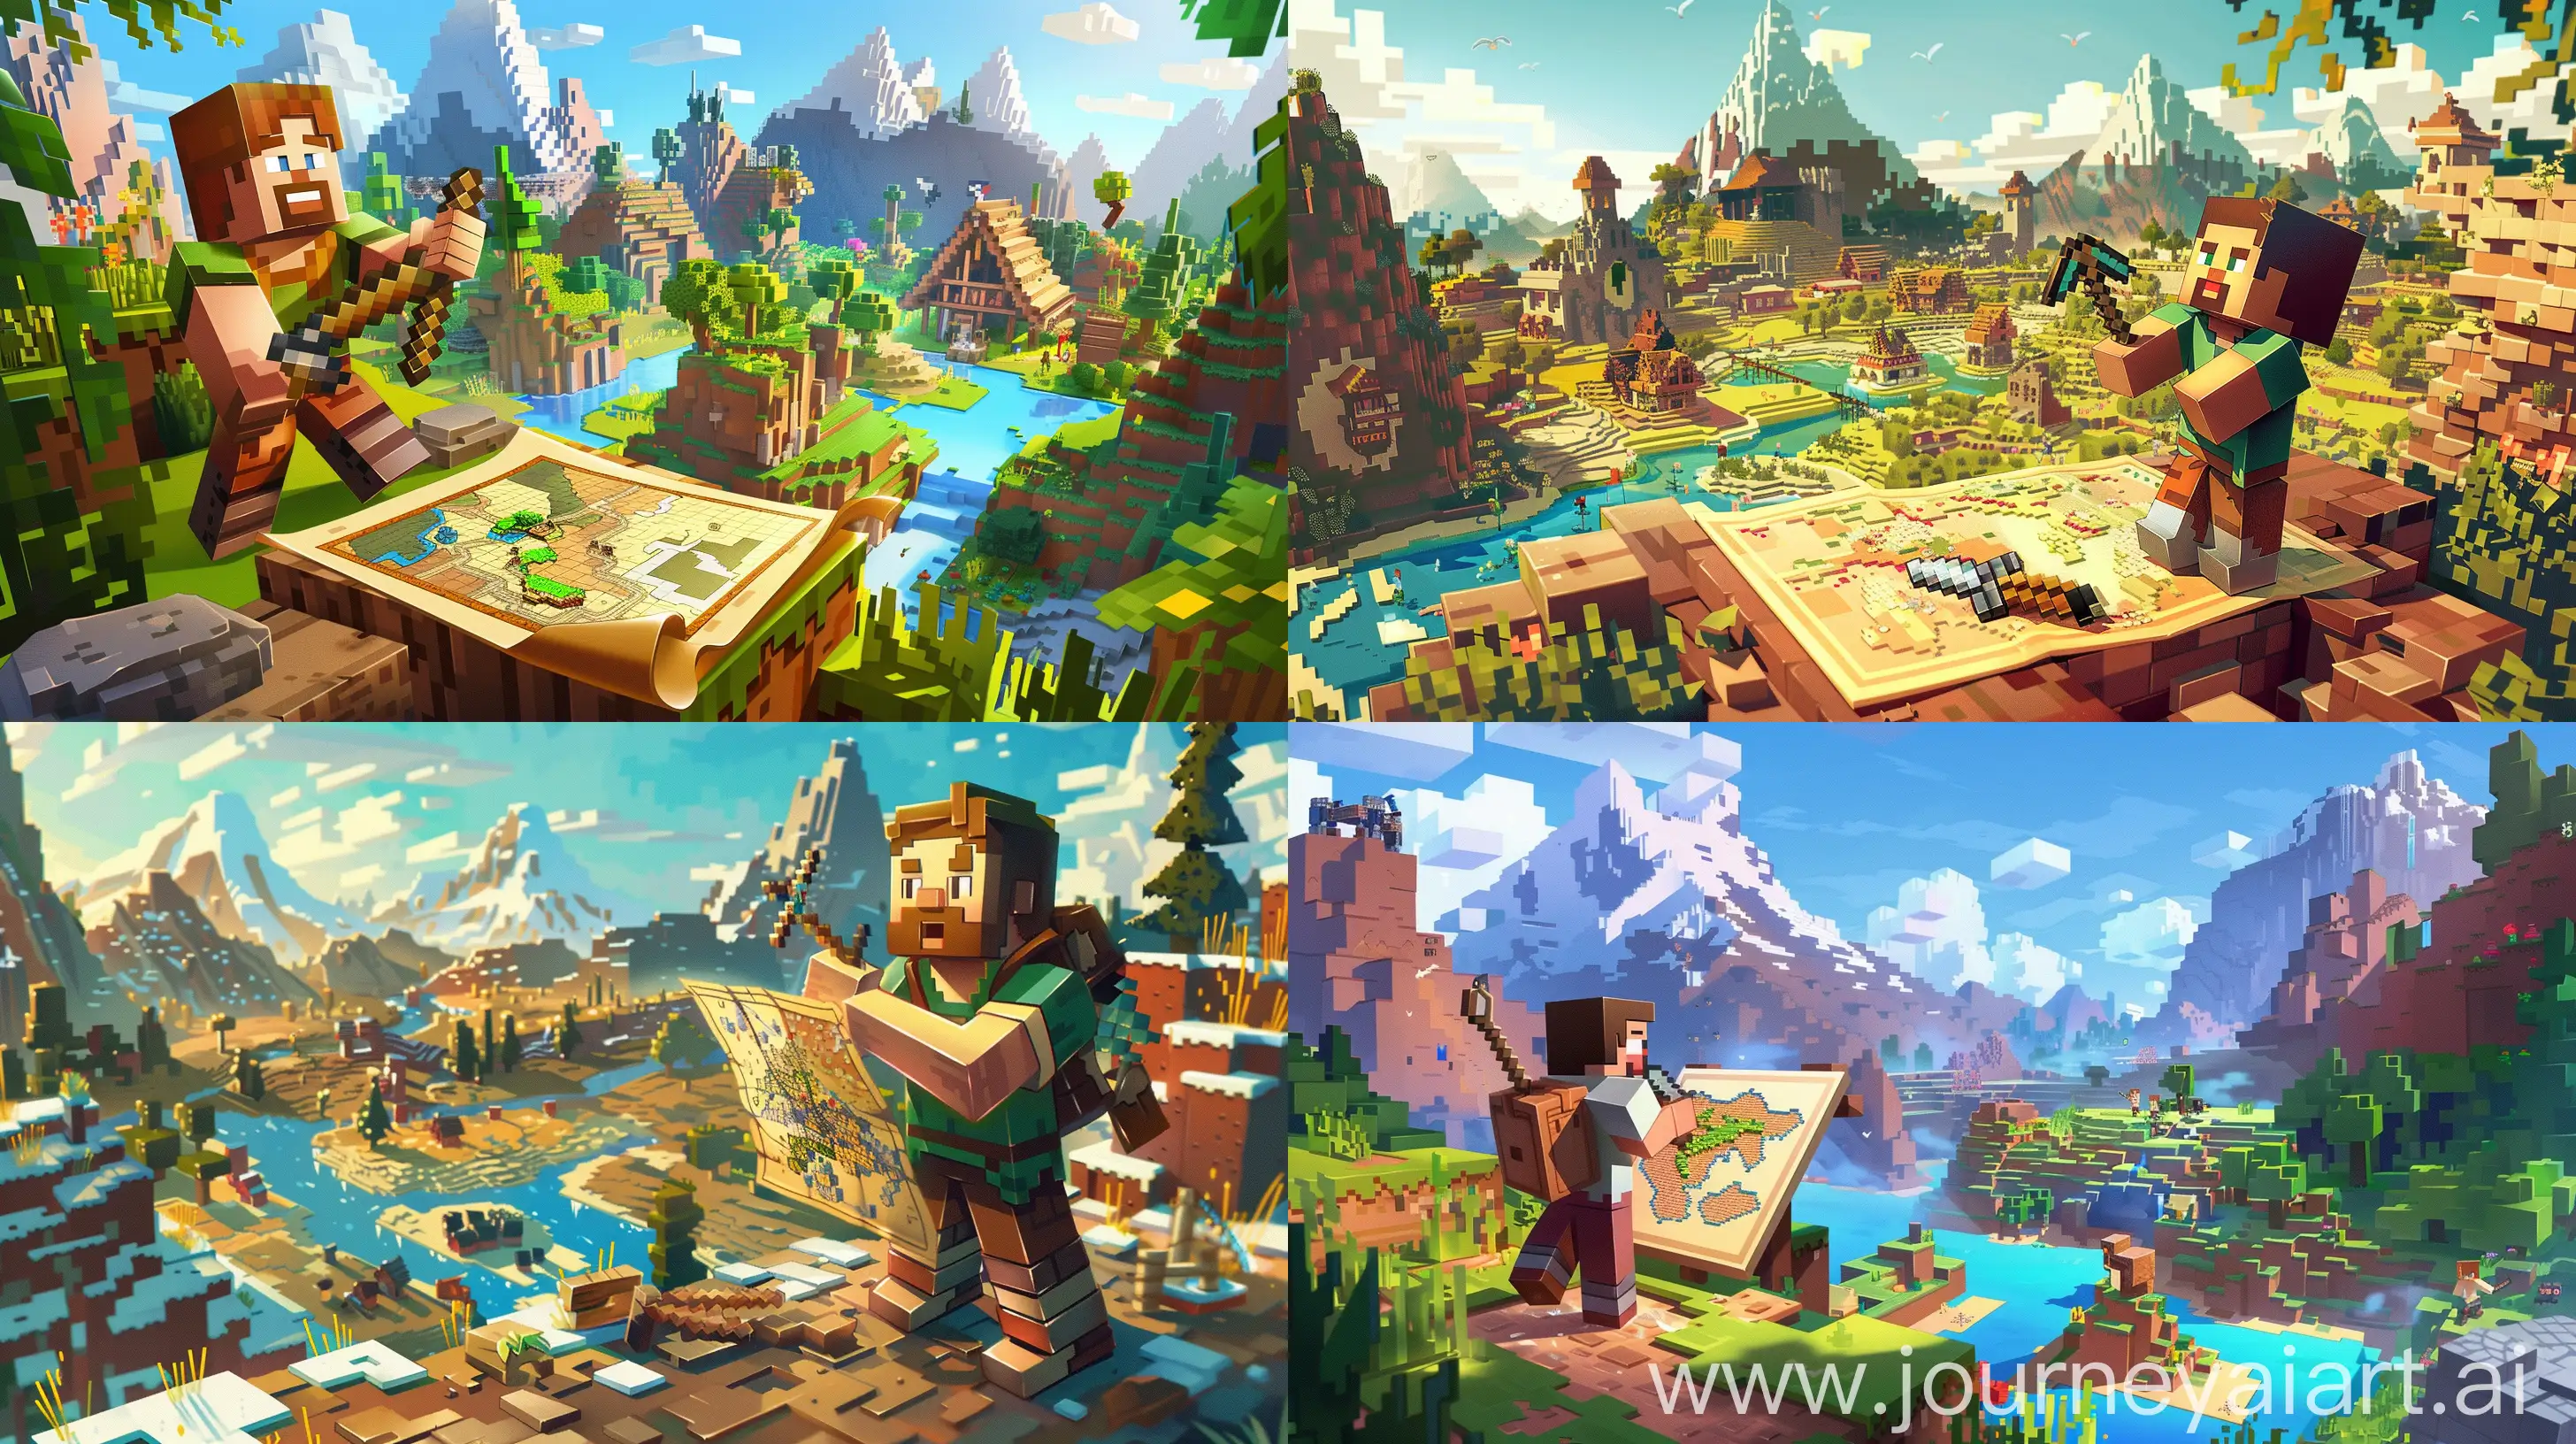 An elaborate illustration capturing the essence of Minecraft maps in version 1.16, introducing players to their world. The artwork showcases a detailed in-game scene where a player character, equipped with tools and surrounded by blocky landscapes, studies a parchment map. The map's vibrant colors and pixelated details highlight key features of the environment, including mountains, forests, and rivers. The character's expression conveys curiosity and excitement, emphasizing the significance of maps in gameplay. Background elements such as other players in the distance and recognizable Minecraft structures subtly reinforce the importance of navigation tools in this version. The composition utilizes a warm, inviting color palette and strategic lighting to evoke a sense of exploration and discovery within the Minecraft universe. --ar 16:9 